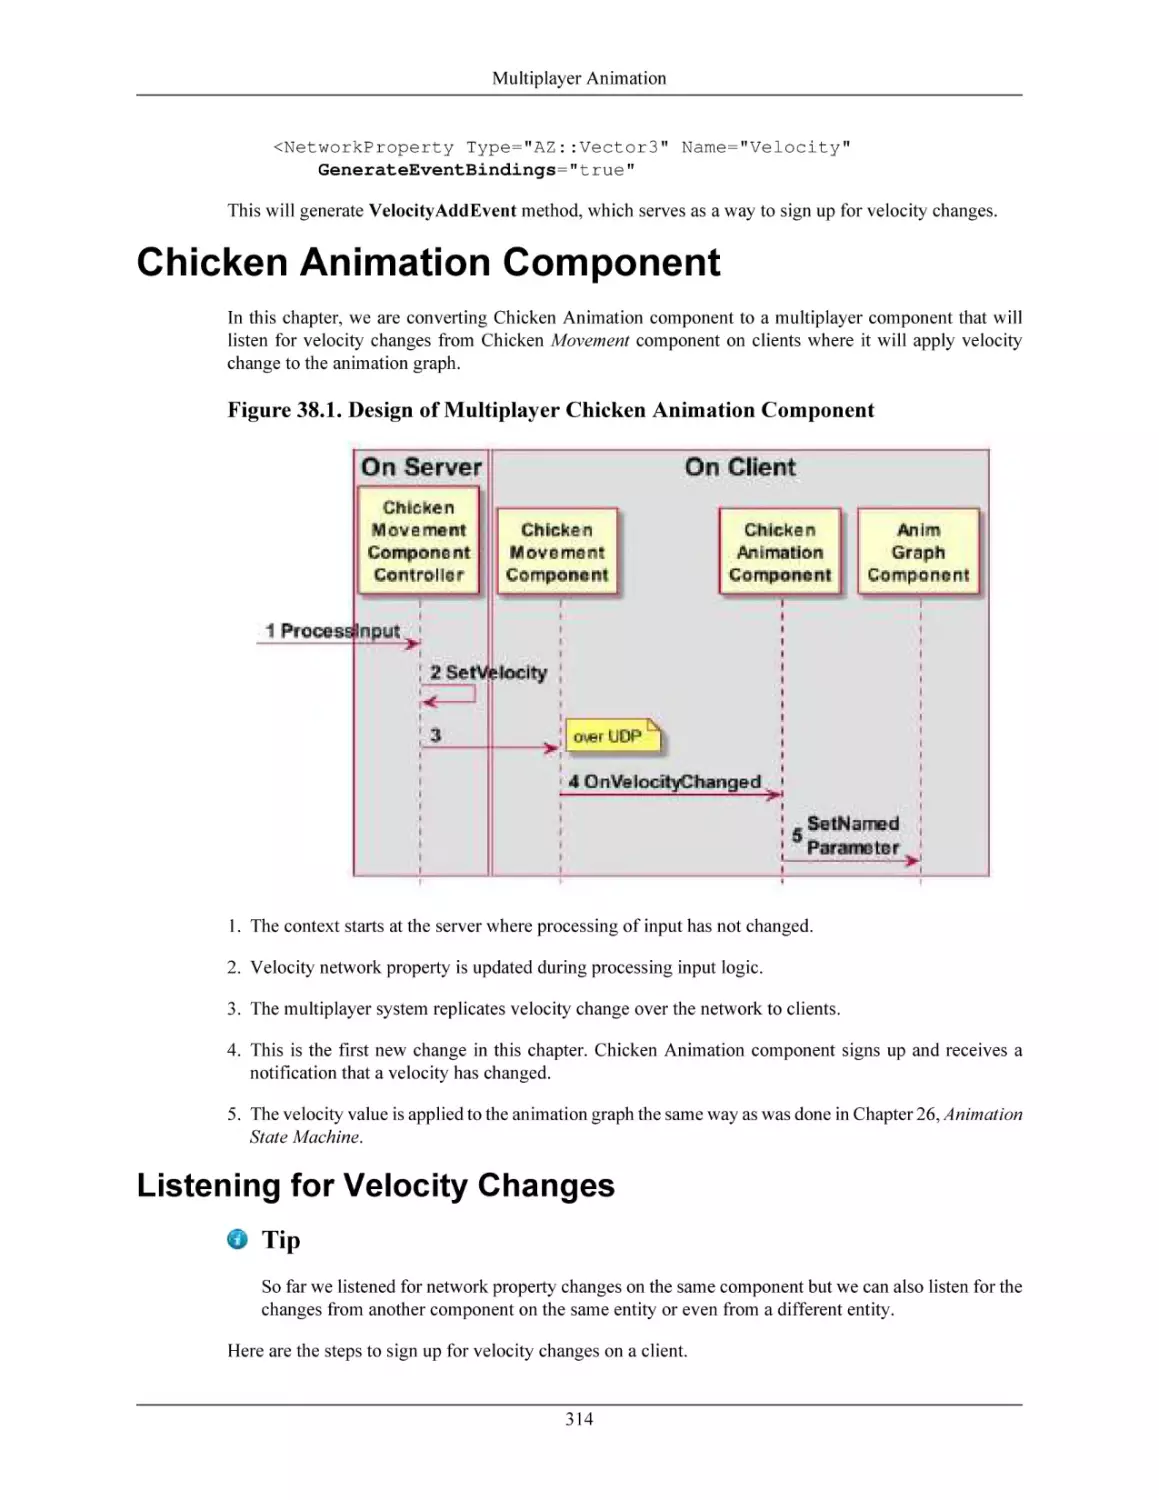 Chicken Animation Component
Listening for Velocity Changes